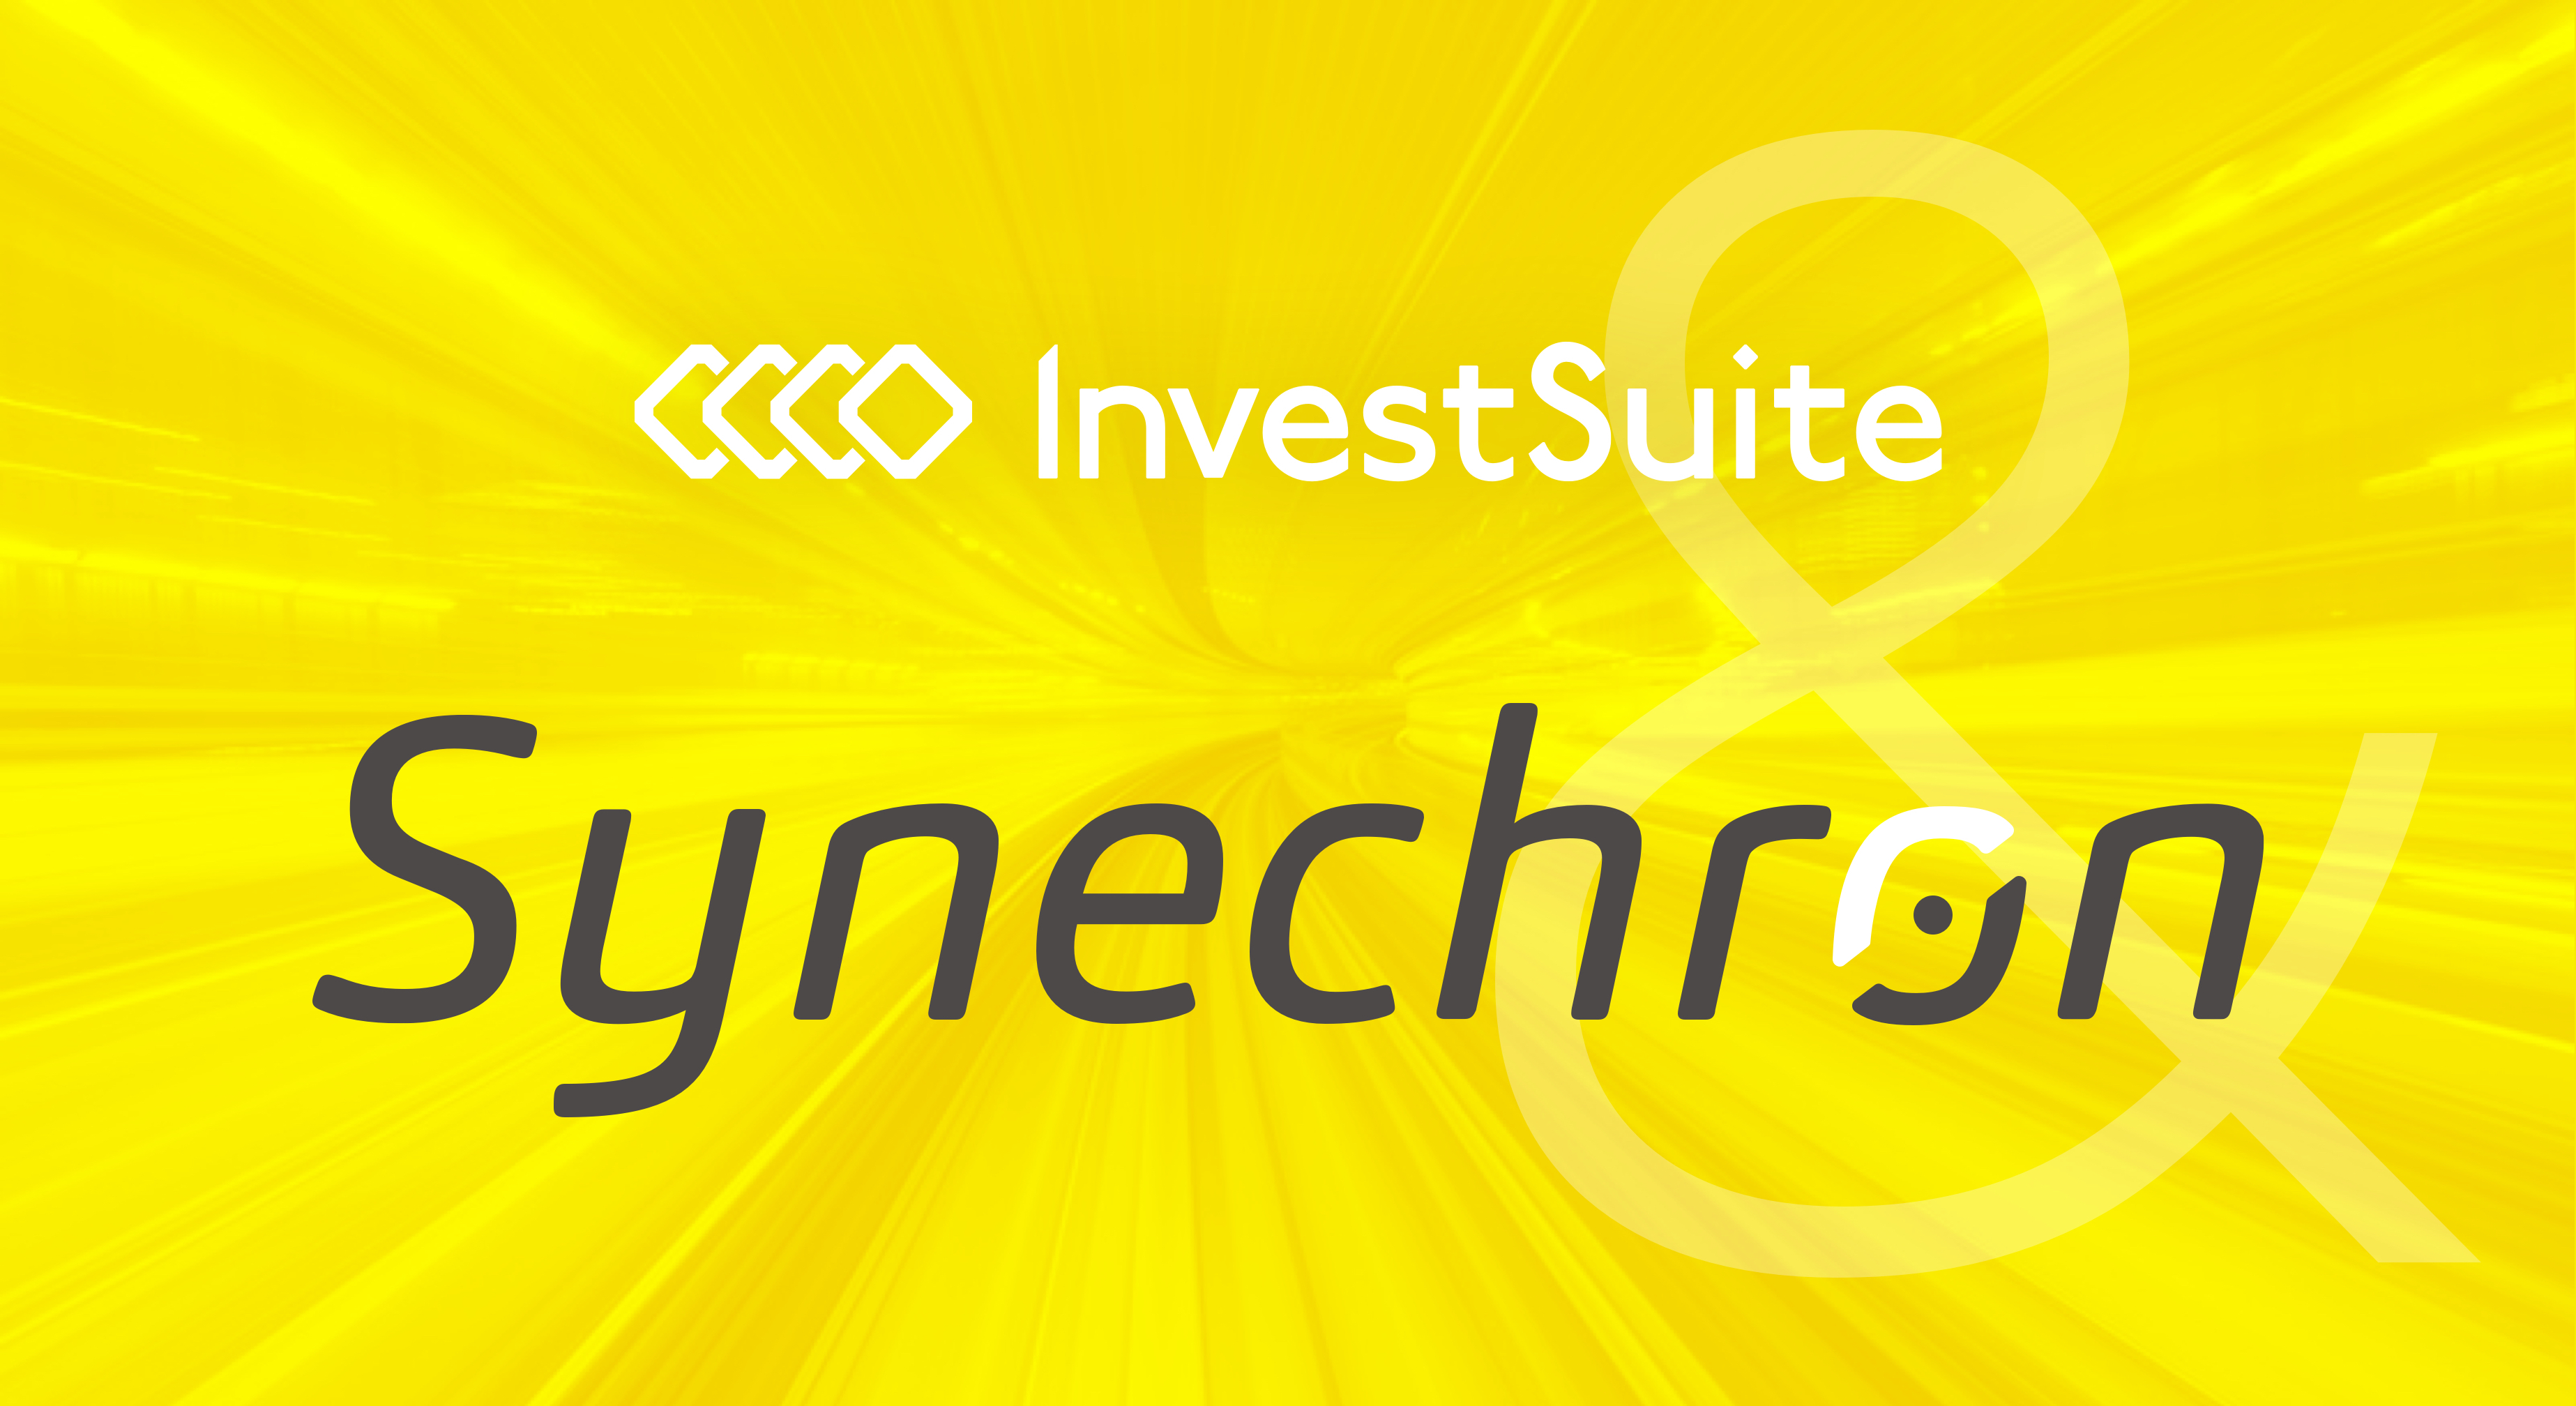 Synechron and InvestSuite partner to drive implementation of digital wealth management solutions for financial services